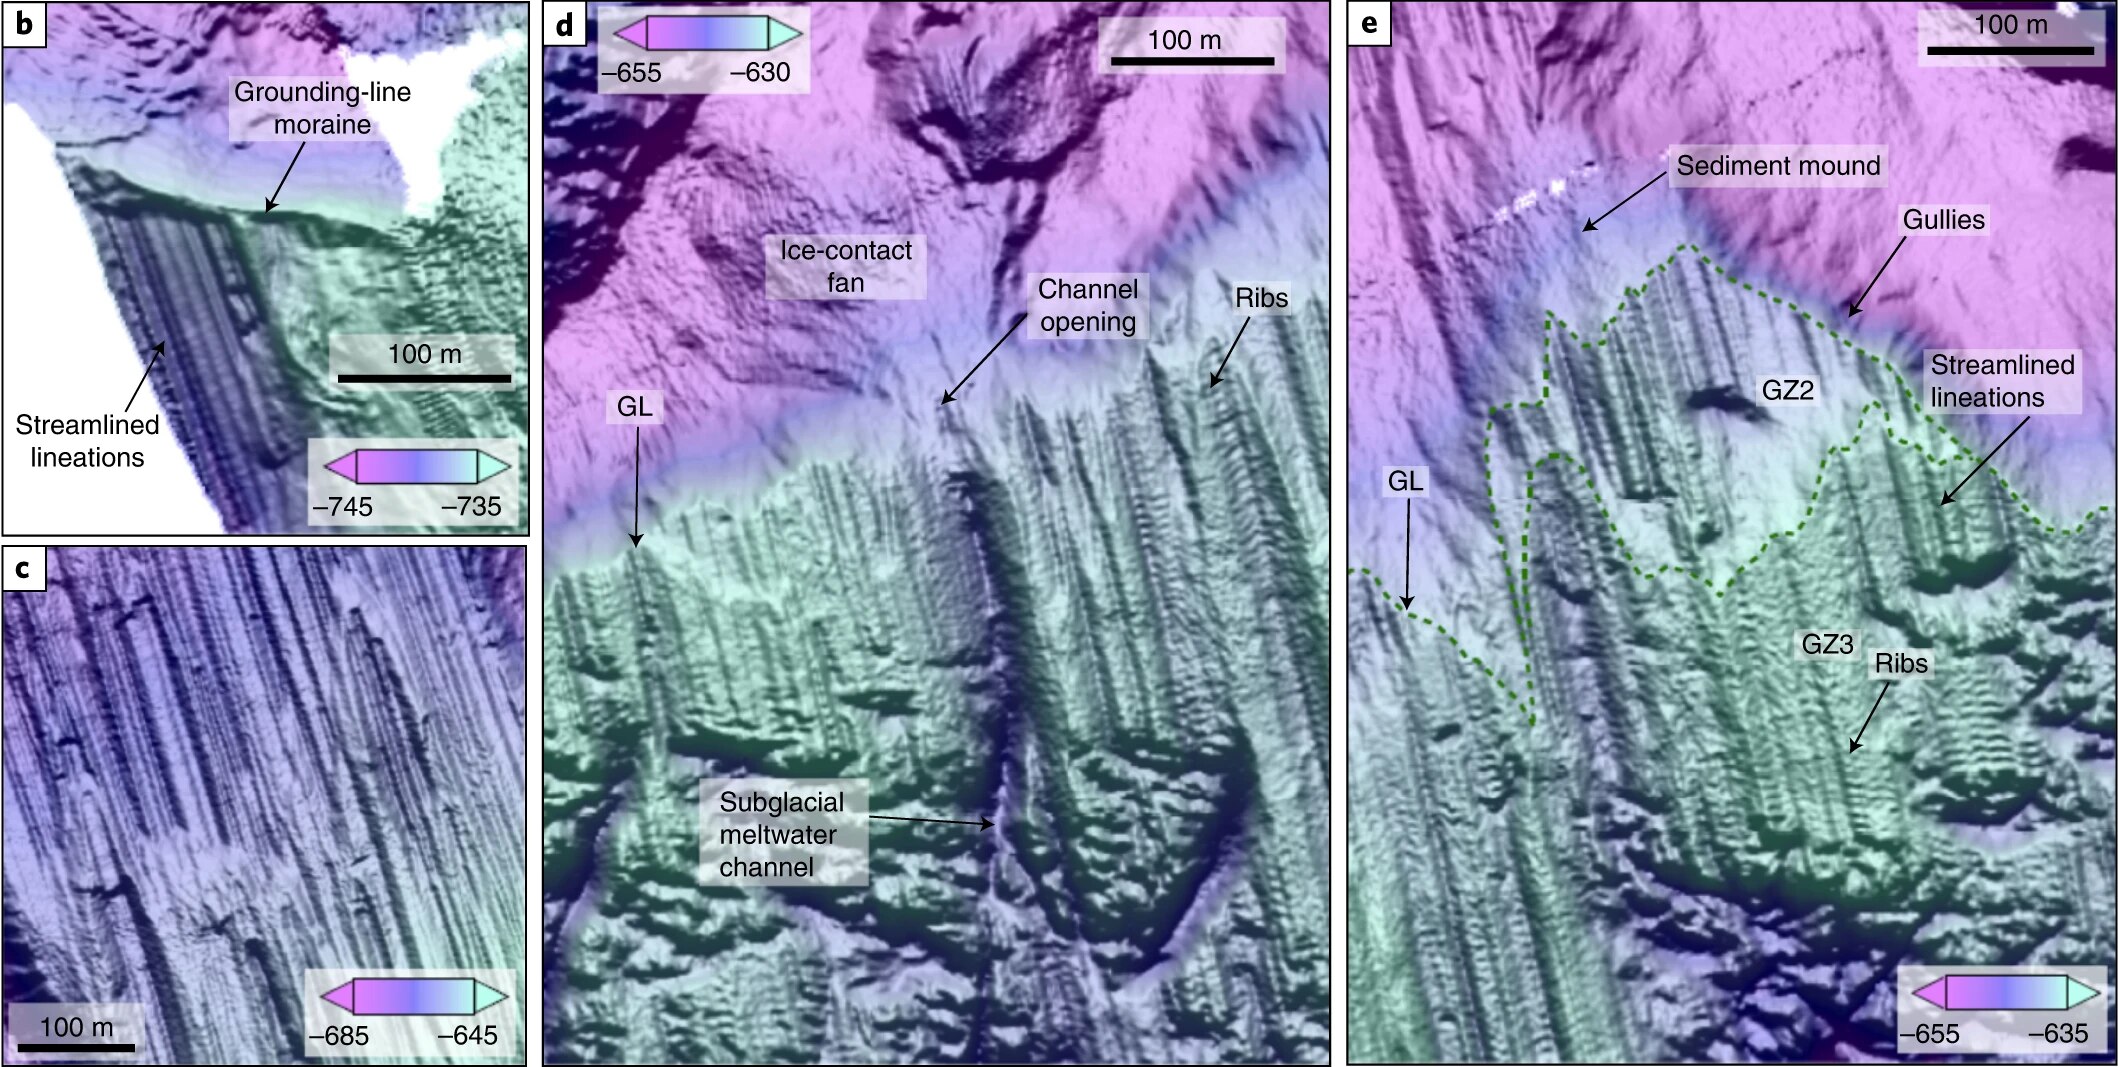 A series of computer-coloured, labelled scientific images shows ridges and melting channels on underwater terrain.